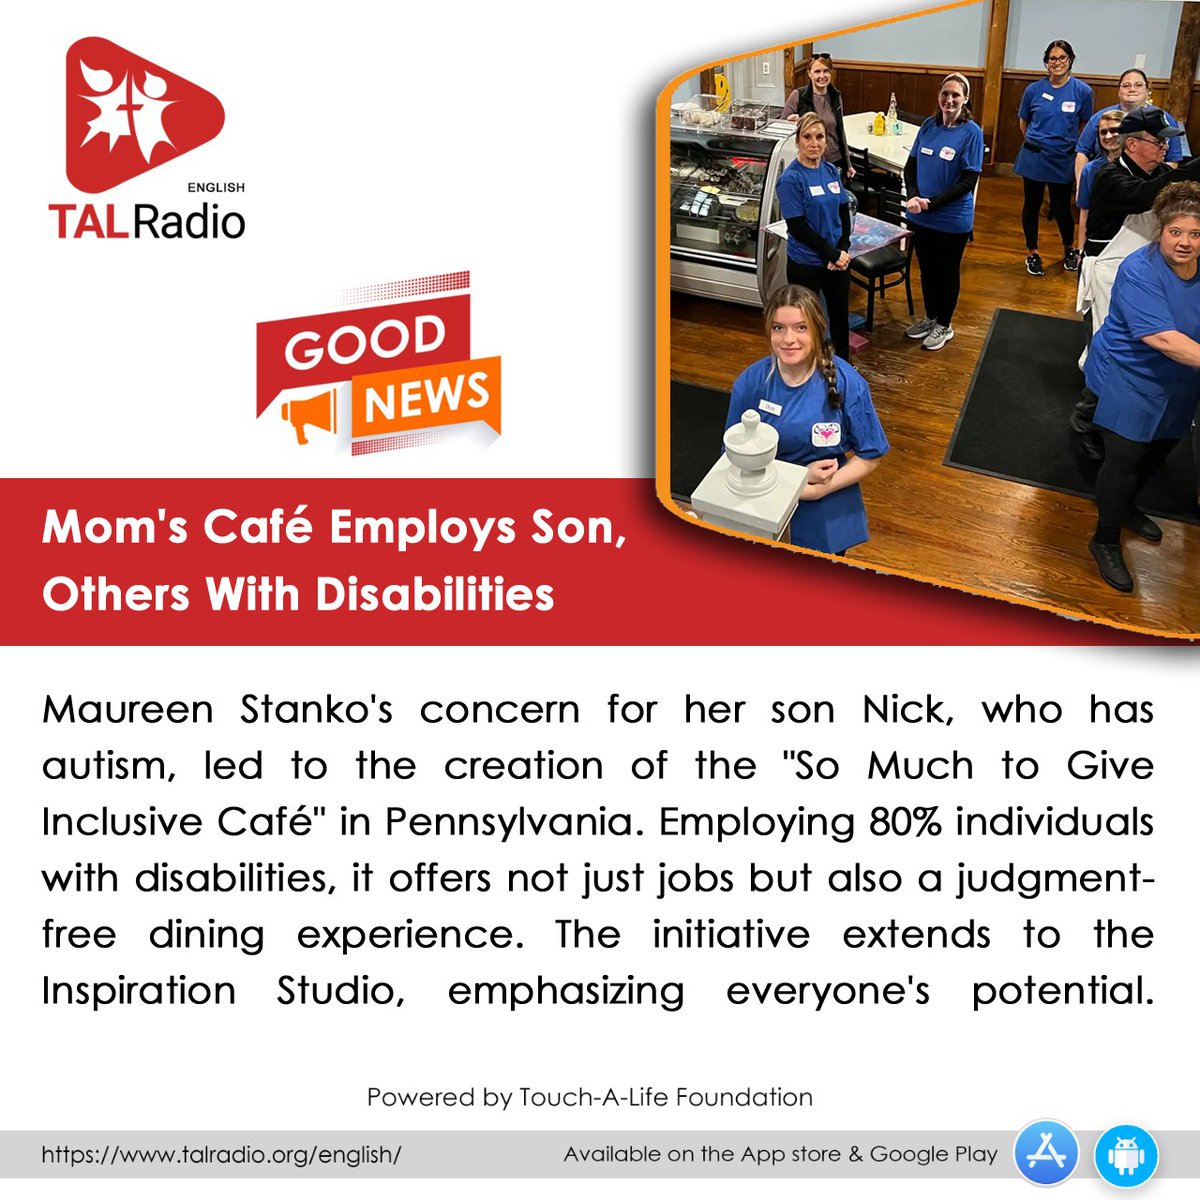 Empowering Abilities: So Much to Give Café'
#TALRadioEnglish #GoodNews #InclusiveEmployment #AutismAwareness #CommunityImpact #Empowerment #TALRadio #TouchALife